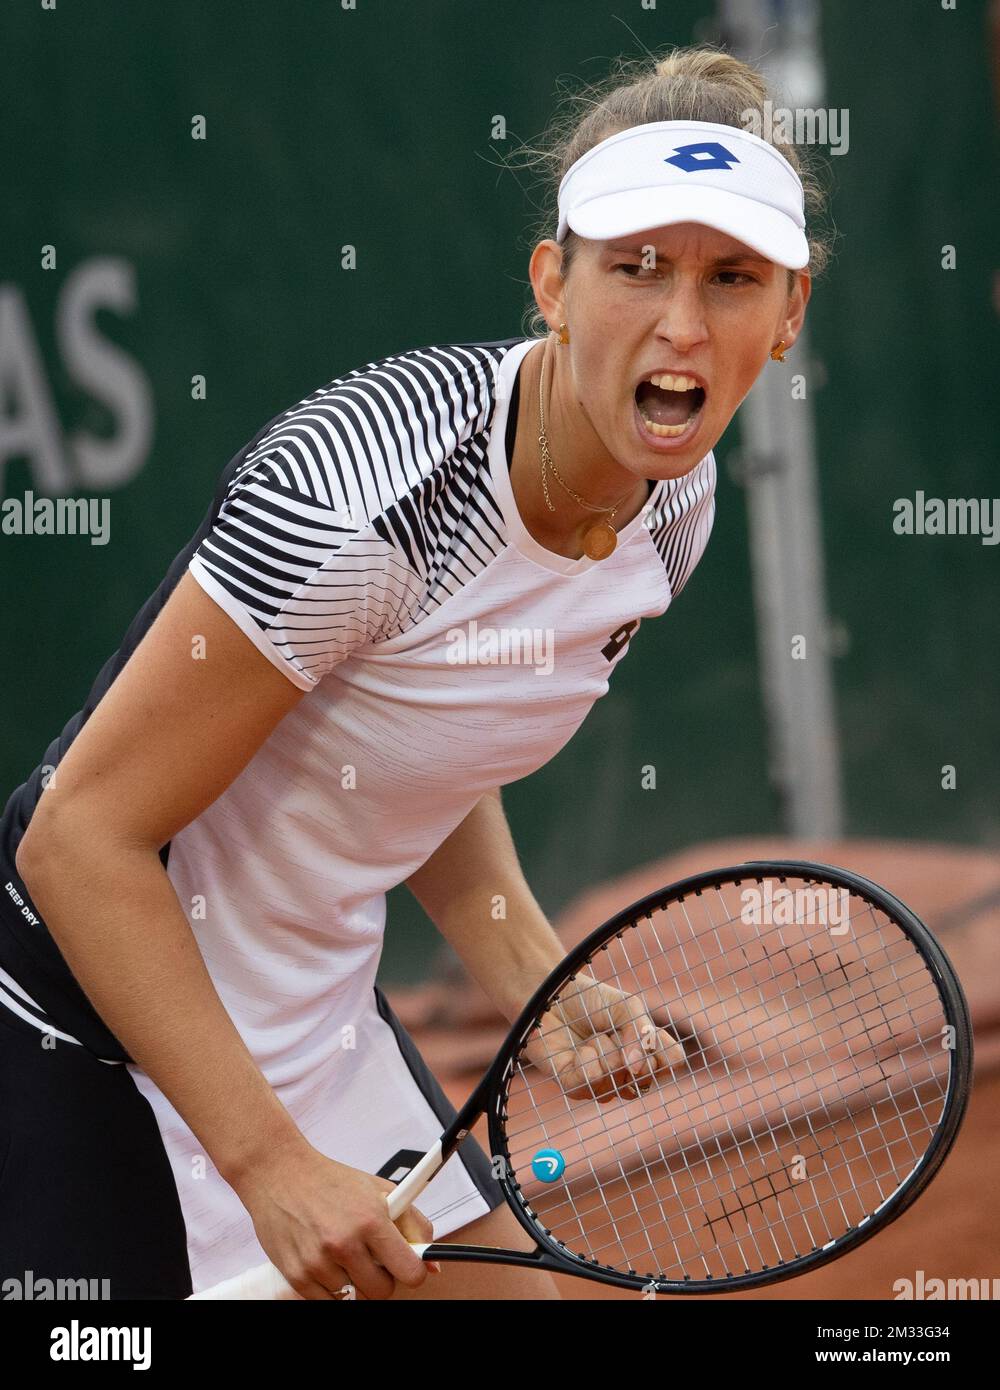 Belgian Elise Mertens celebrates during a tennis match against Estonian  Kanepi in the women's singles second round at the Roland Garros French Open  tennis tournament, in Paris, France, Wednesday 30 September 2020.